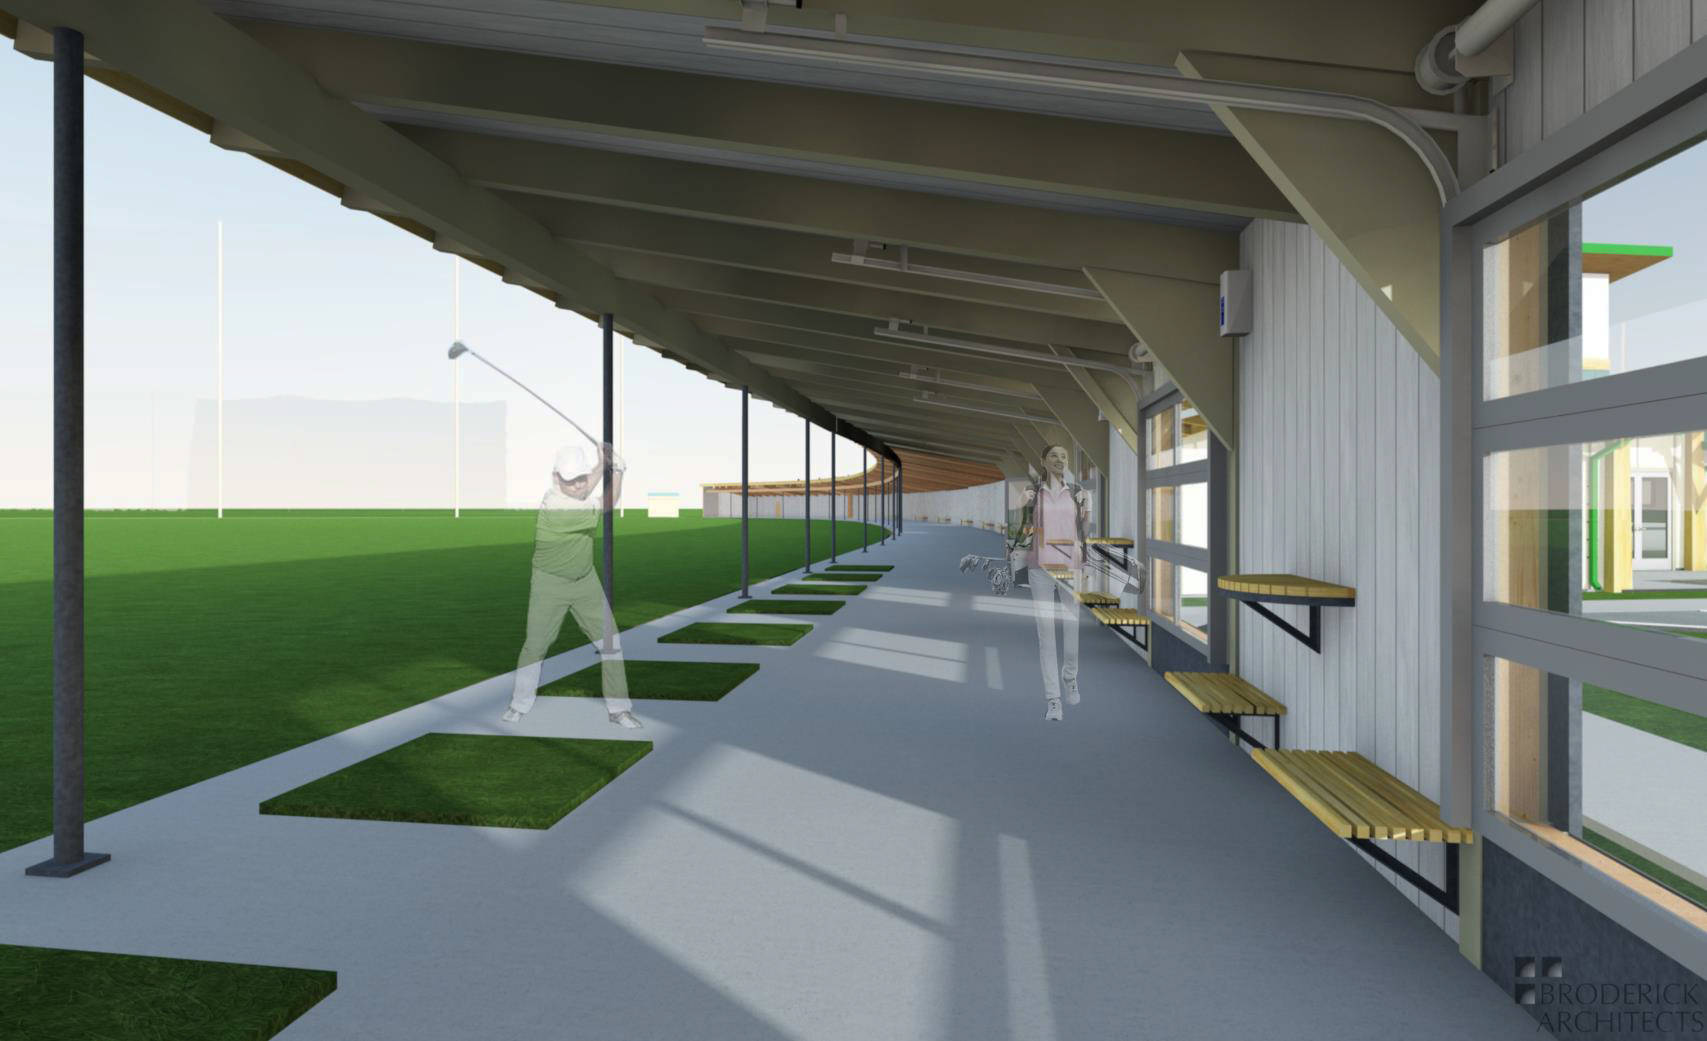 A rendering of the renovated driving range area at the Riverbend Golf Complex. COURTESY GRAPHIC, City of Kent